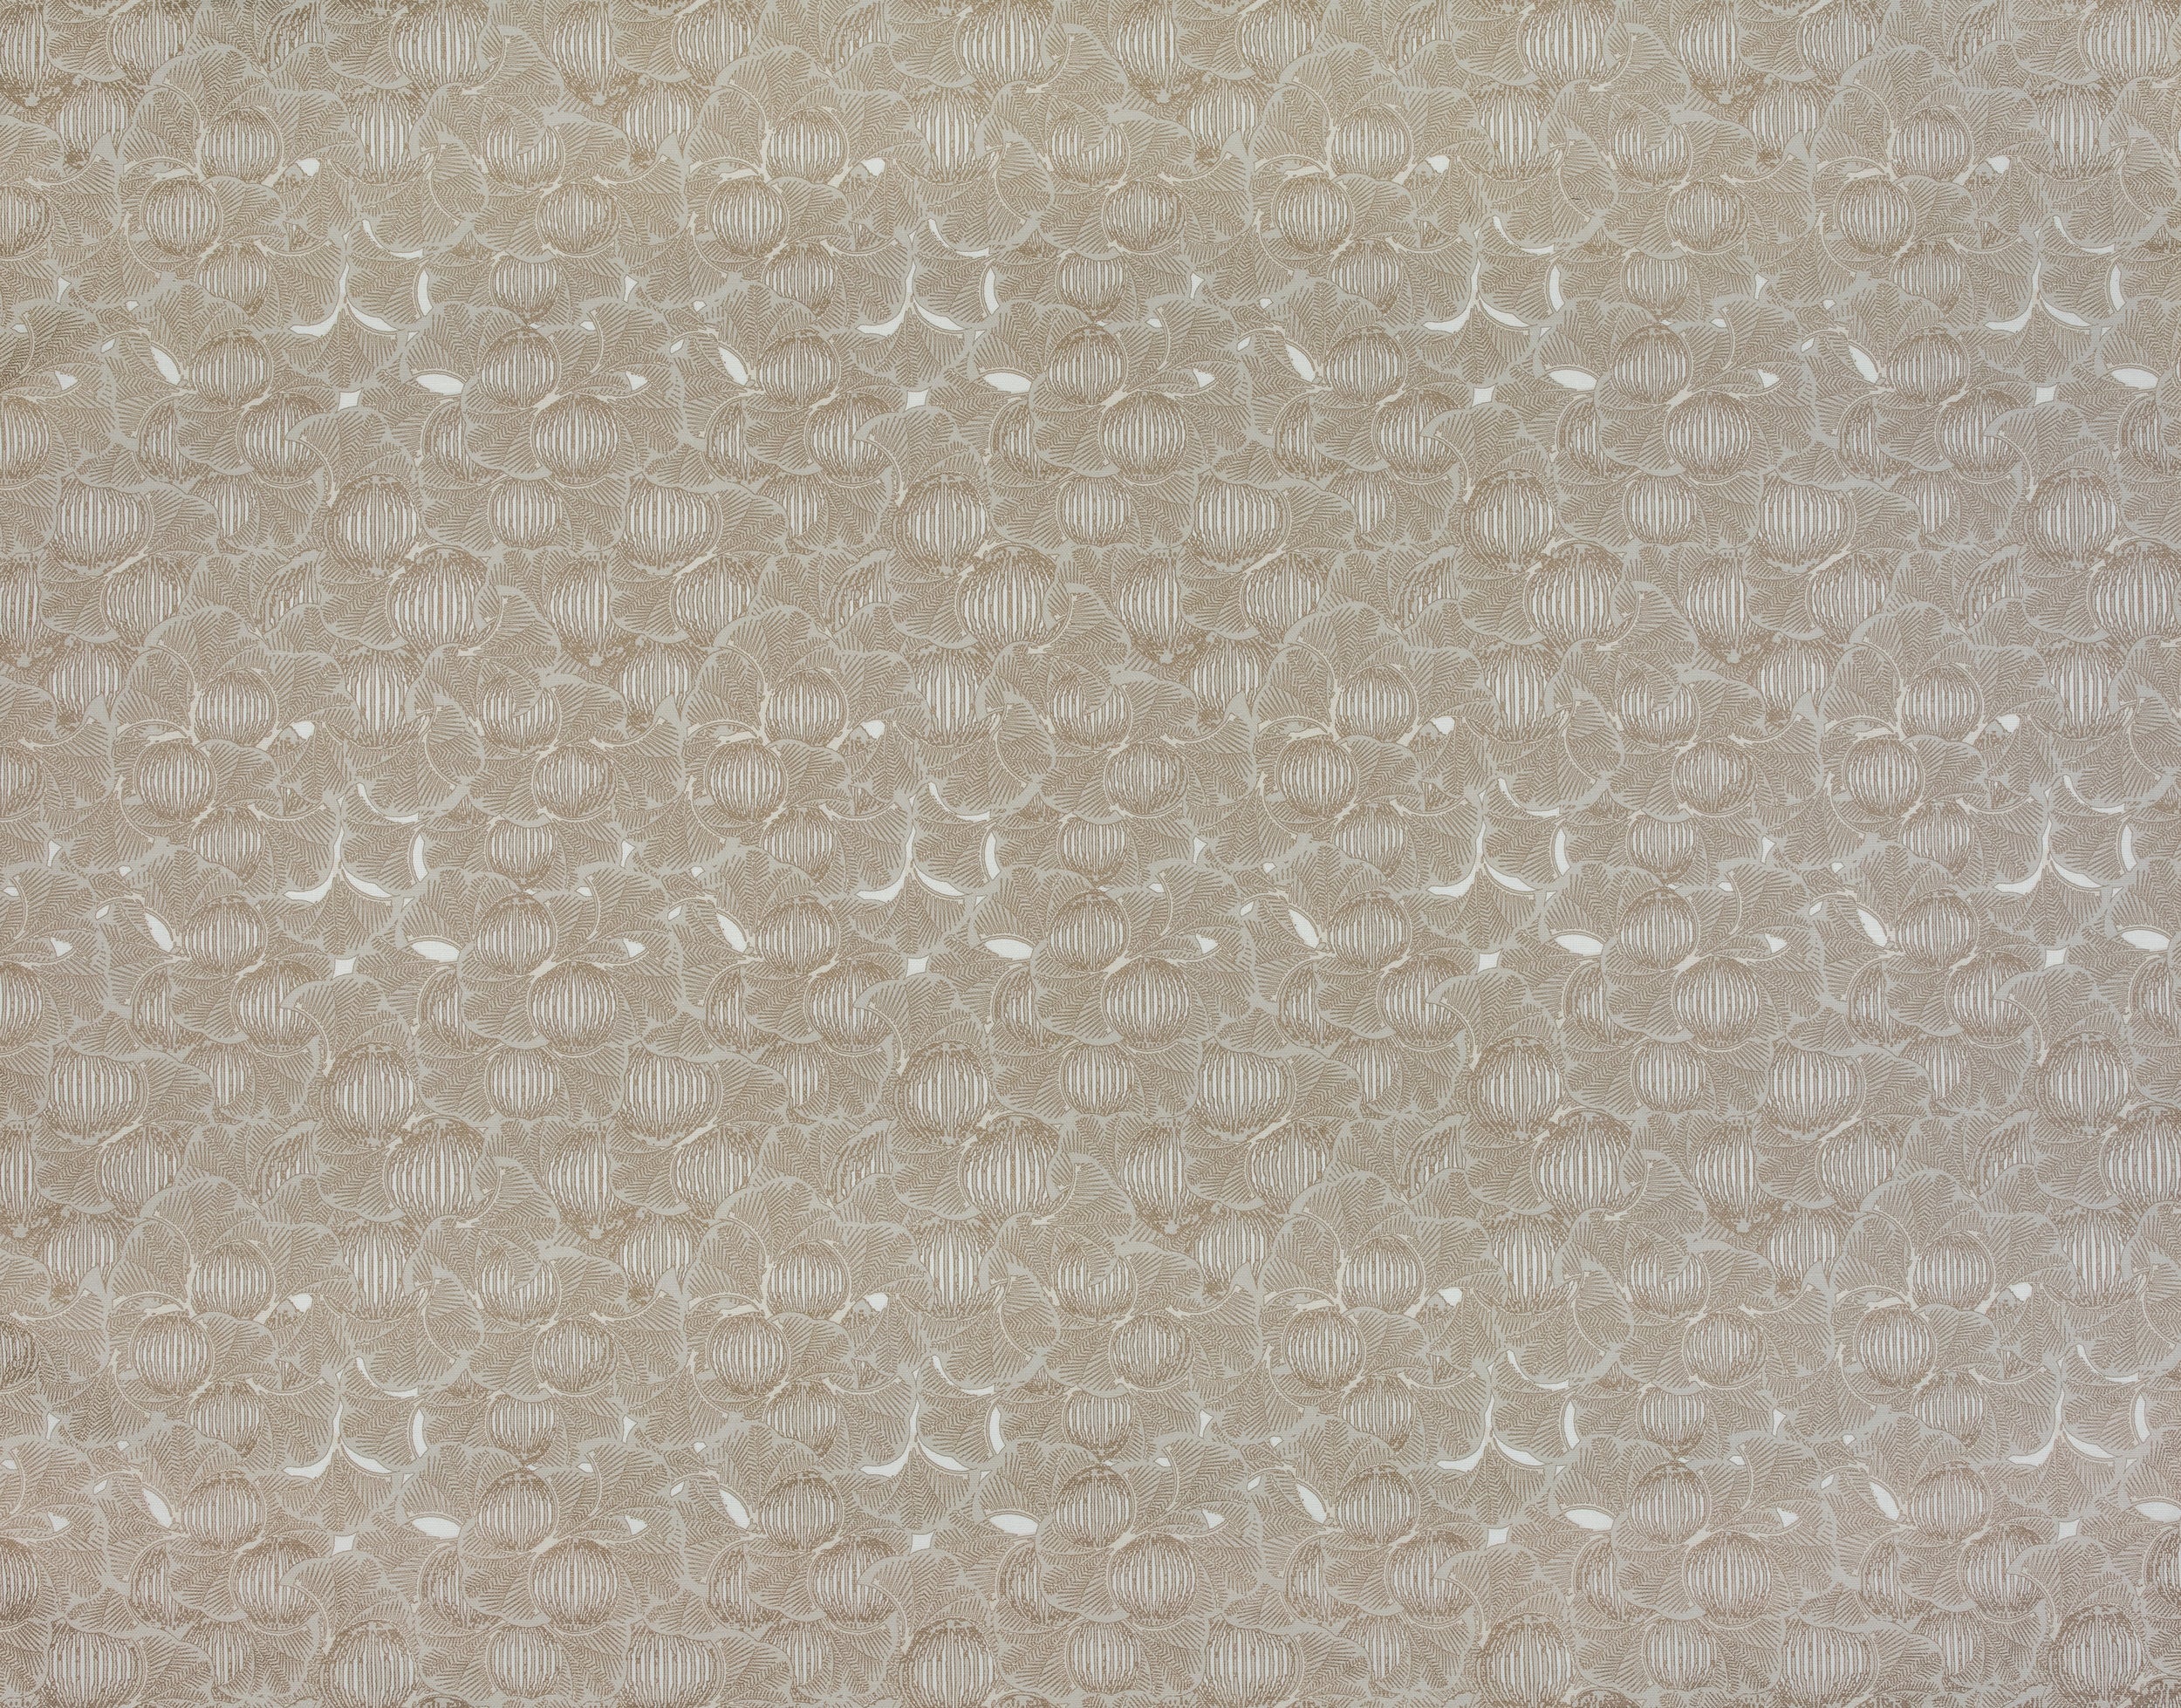 Detail of fabric in a dense petal print in shades of tan on a white field.